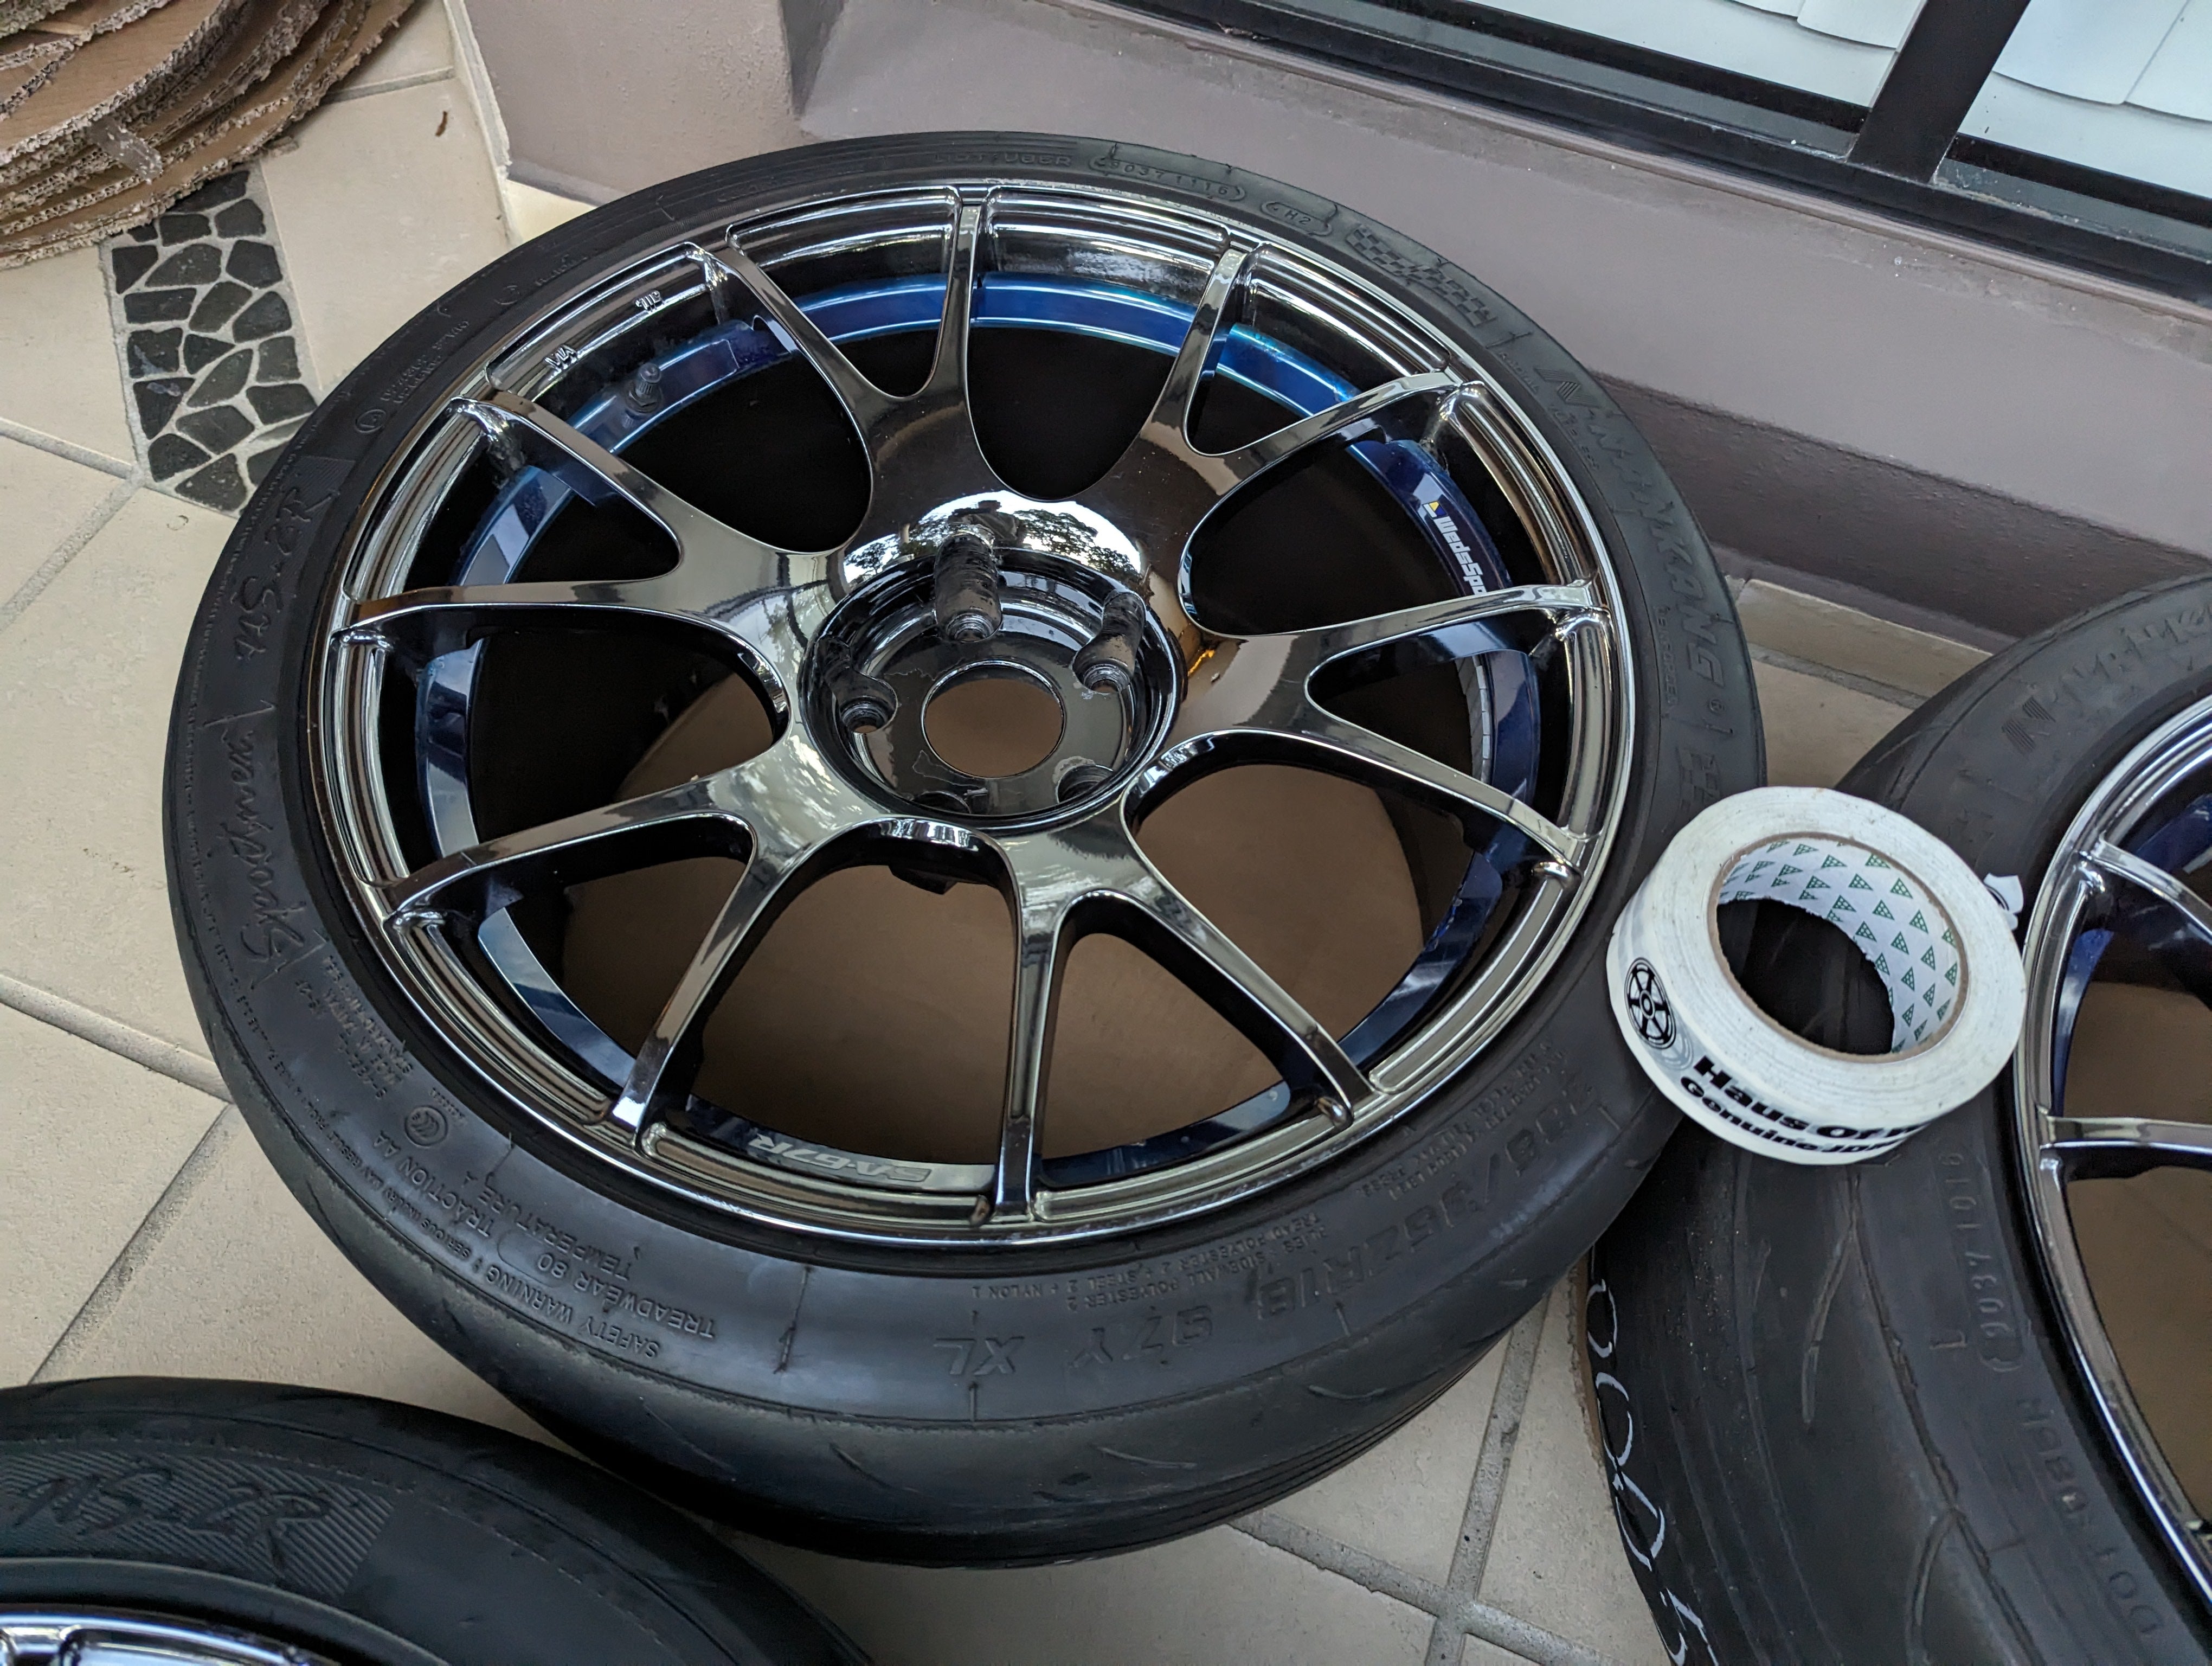 PCD 5x114.3 *Chrome* Wedssport SA67R in Shadow Blue Chrome with Tyres